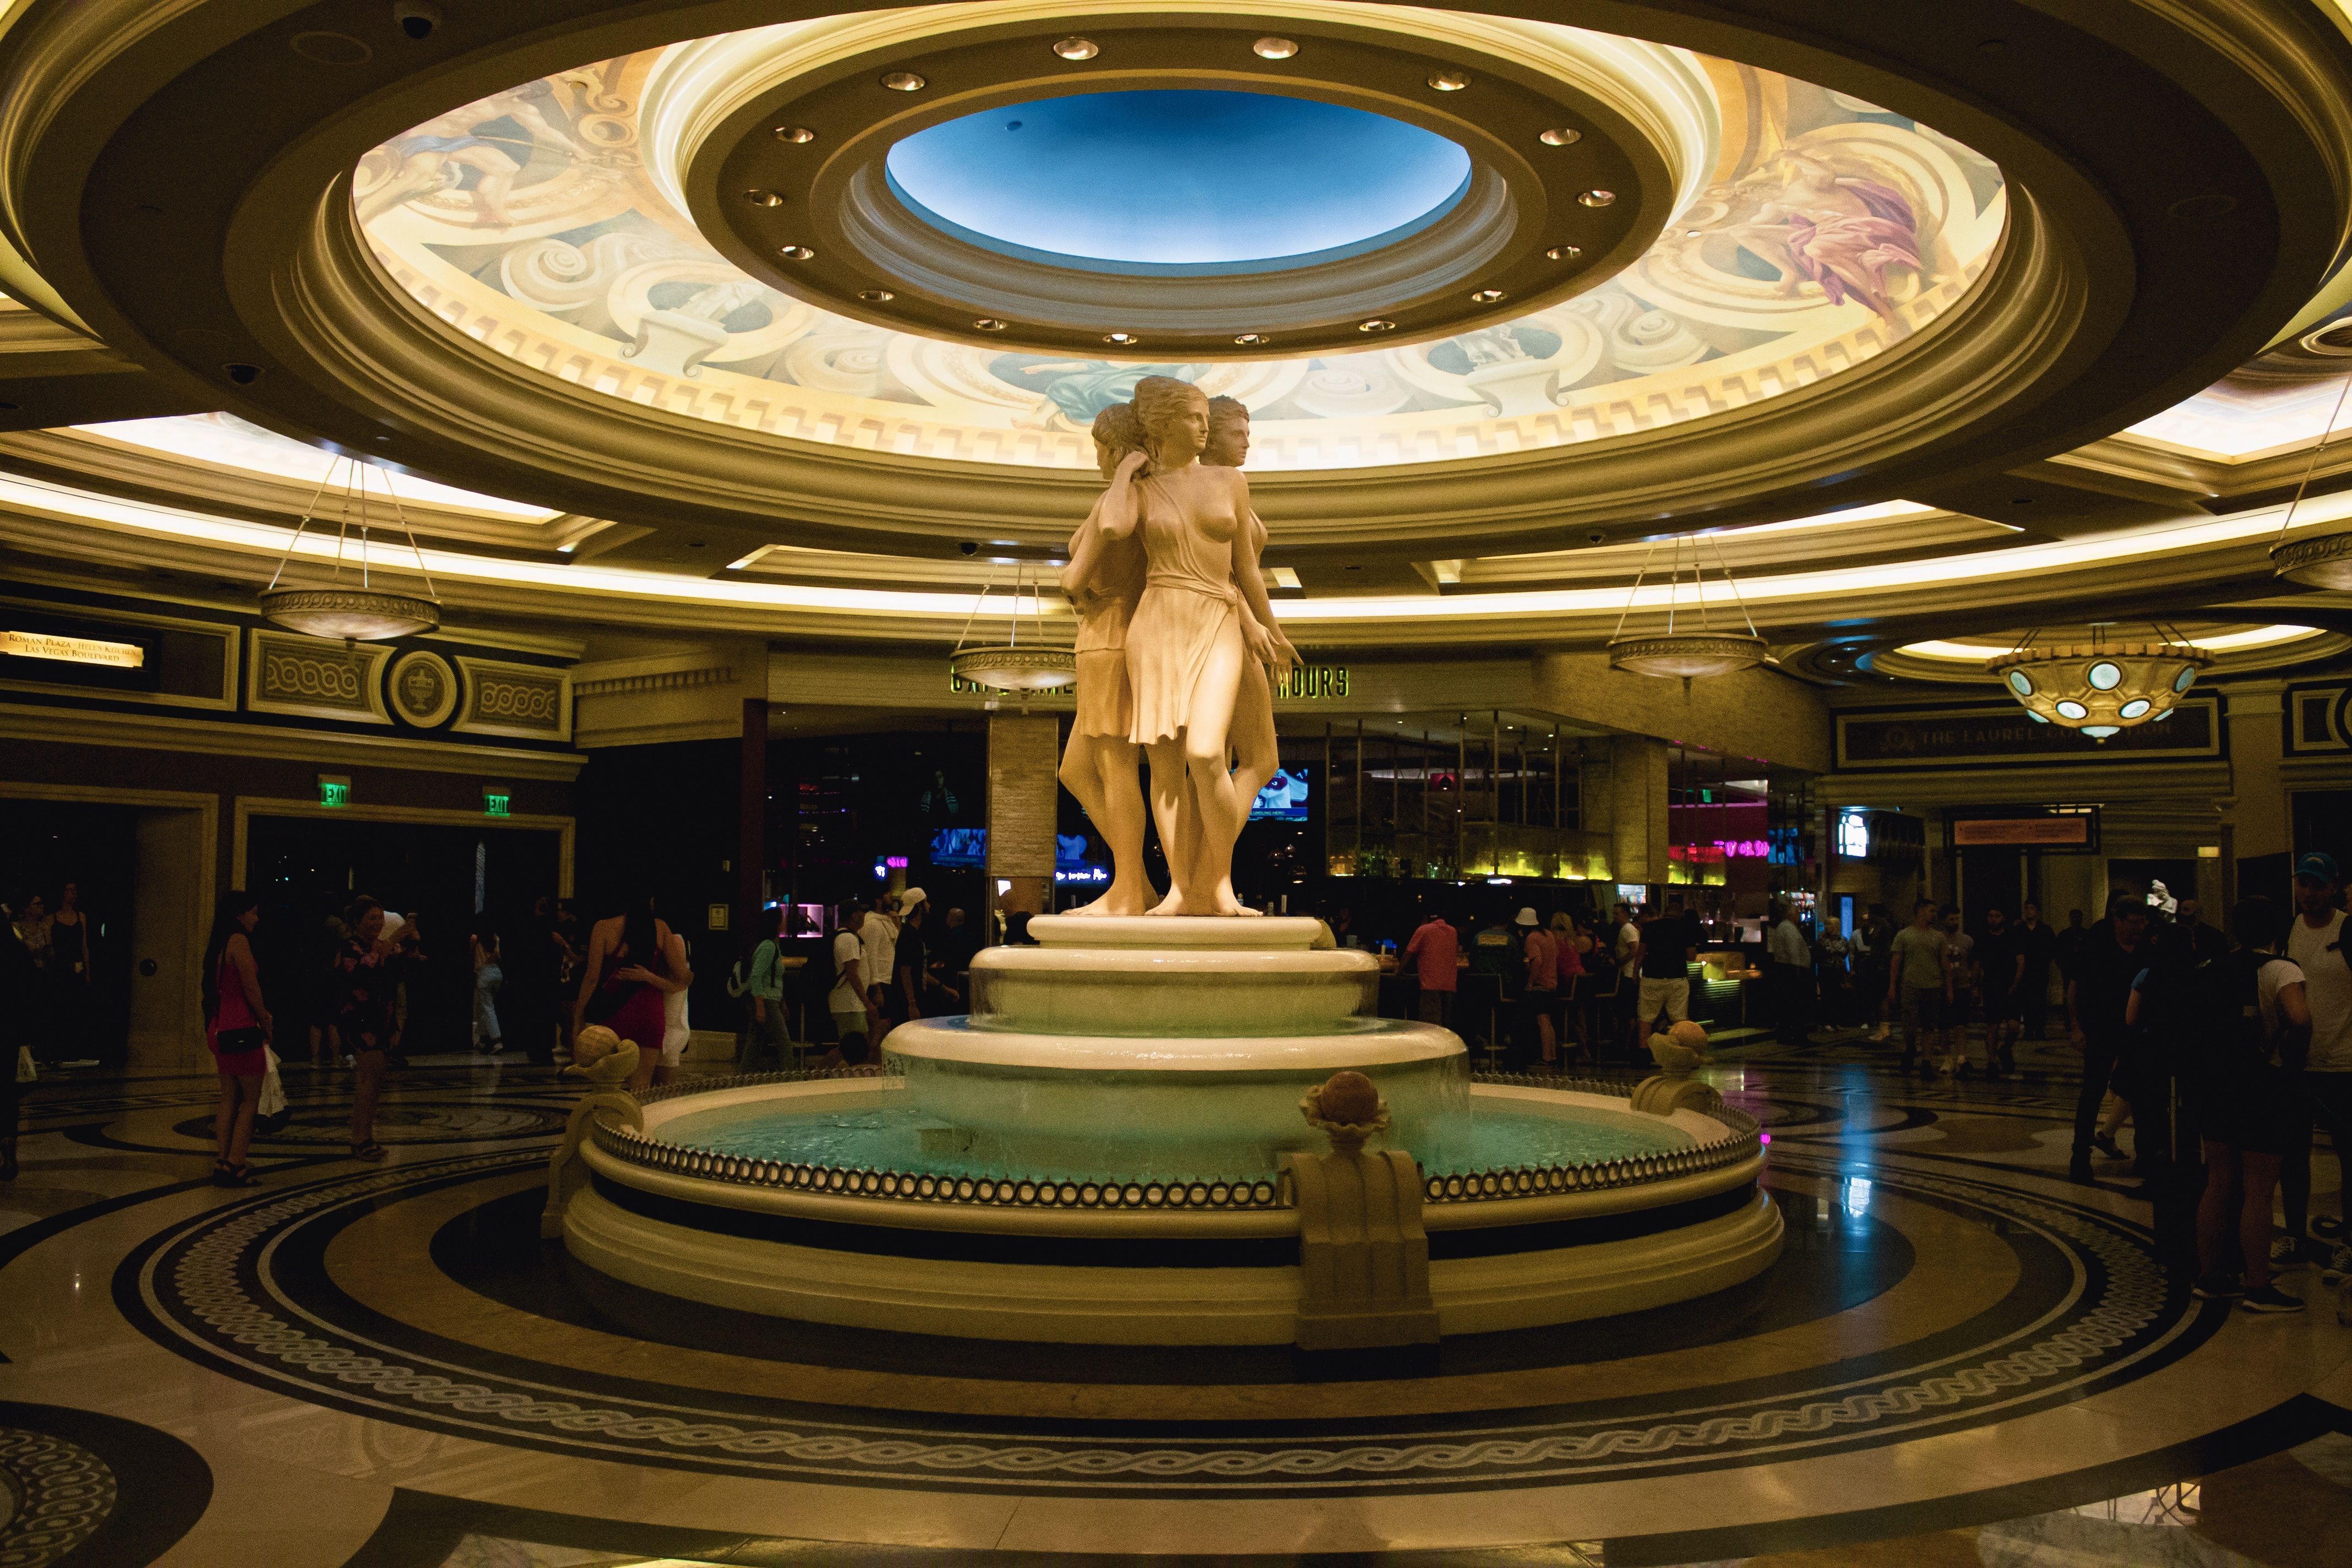 A Statue on Display inside Caesars' Palace Hotel and Casino in Las Vegas